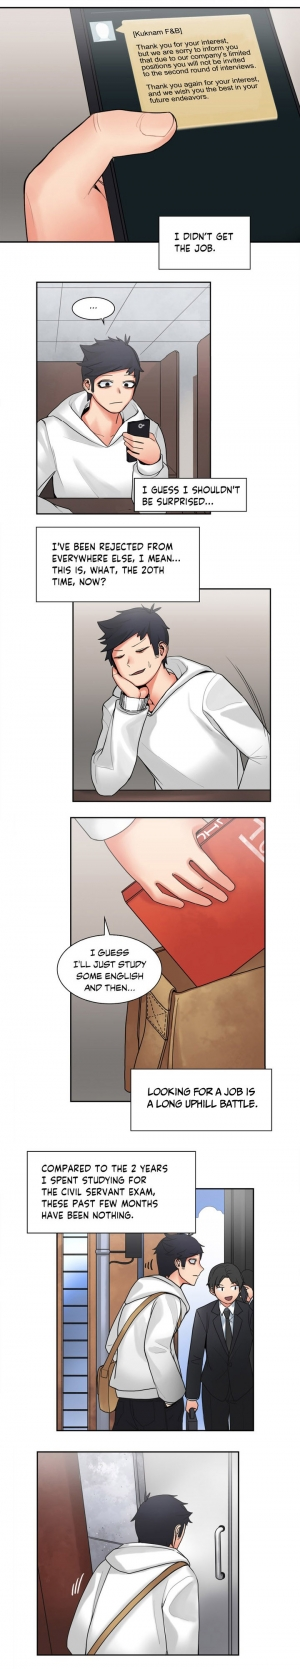 [Gaehoju, Gunnermul] The Girl That Got Stuck in the Wall Ch.11/11 [COMPLETED] [English] [Hentai Universe] - Page 79